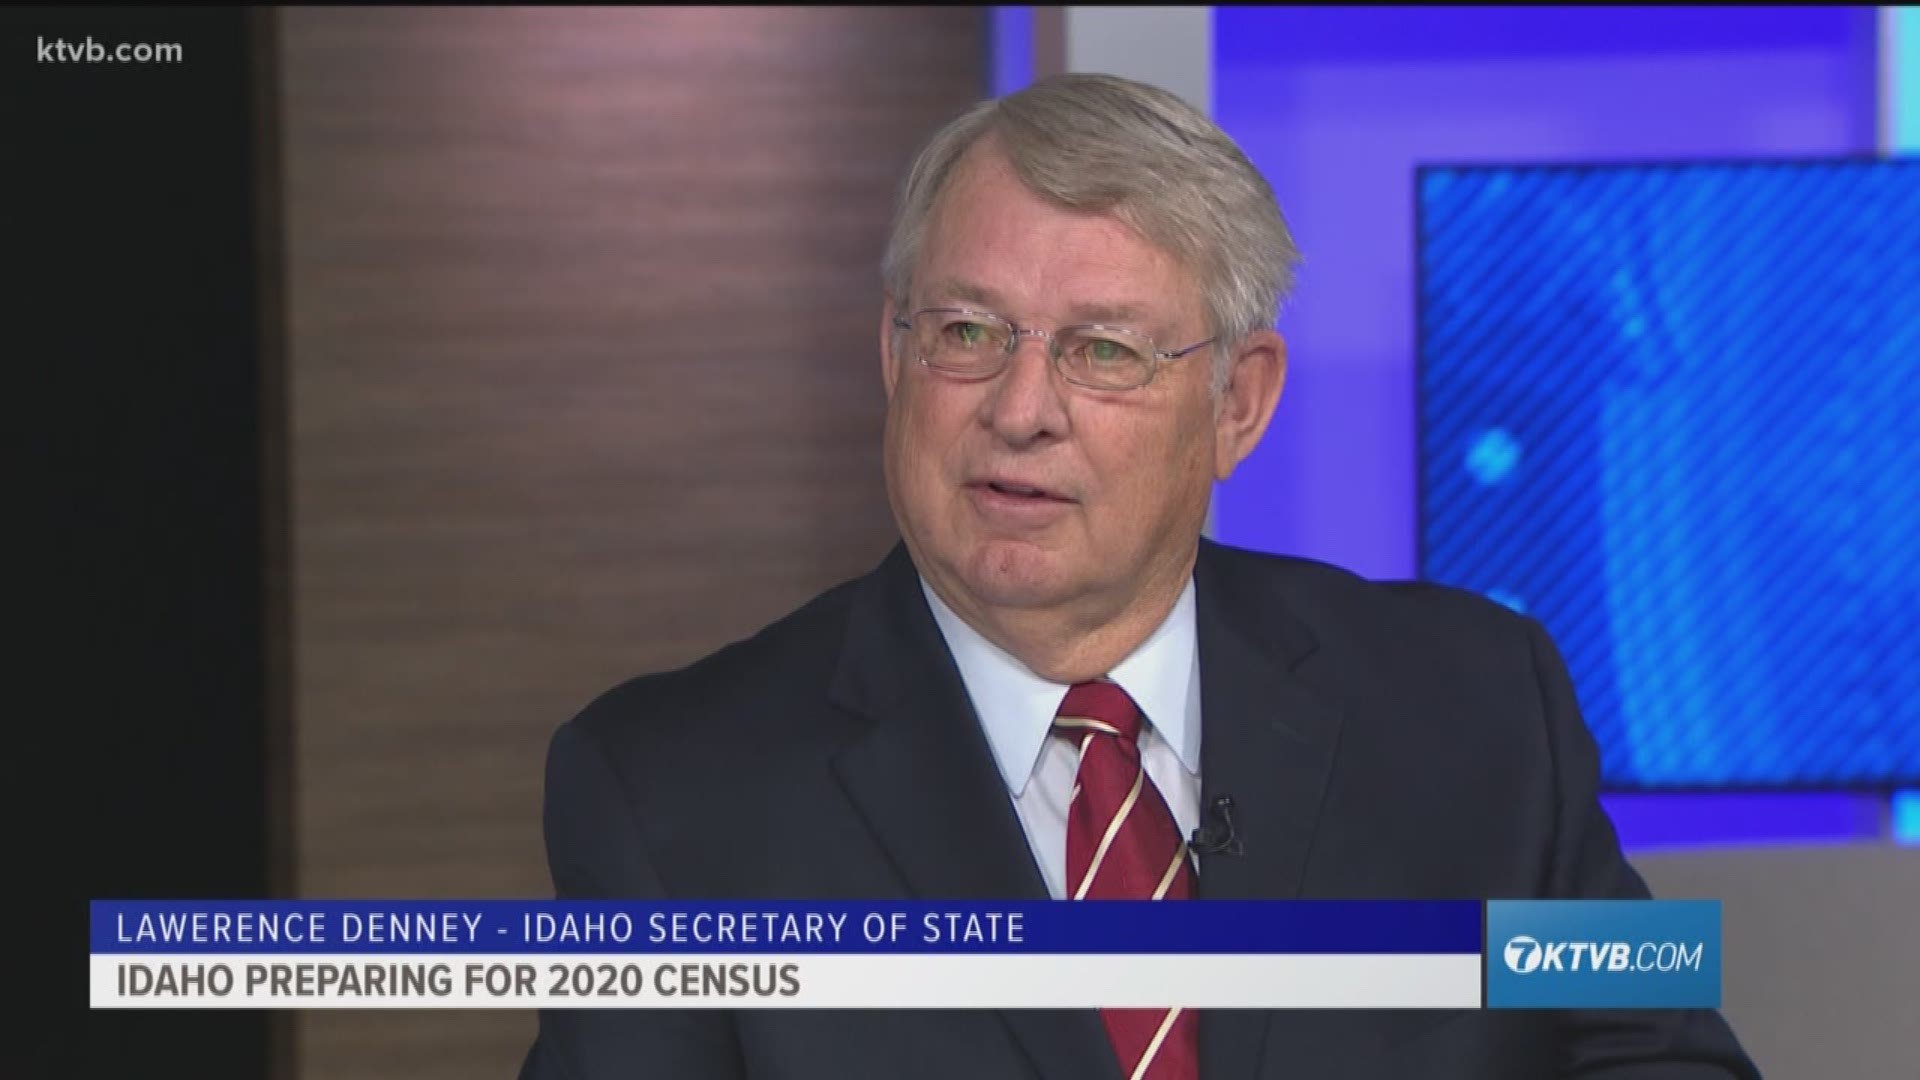 The 2020 U.S. Census won't start for about another eight months, but the state of Idaho is already preparing for it. In this week's Viewpoint, KTVB's Doug Petcash sits down with Idaho Secretary of State Lawerence Denney to discuss how the state is getting ready for the census. Plus, find out how Idaho spends the lottery dividend, which was about $60 million this year alone. Hear from the Idaho Lottery Director Jeff Anderson on how Idaho is spending the $60 million.